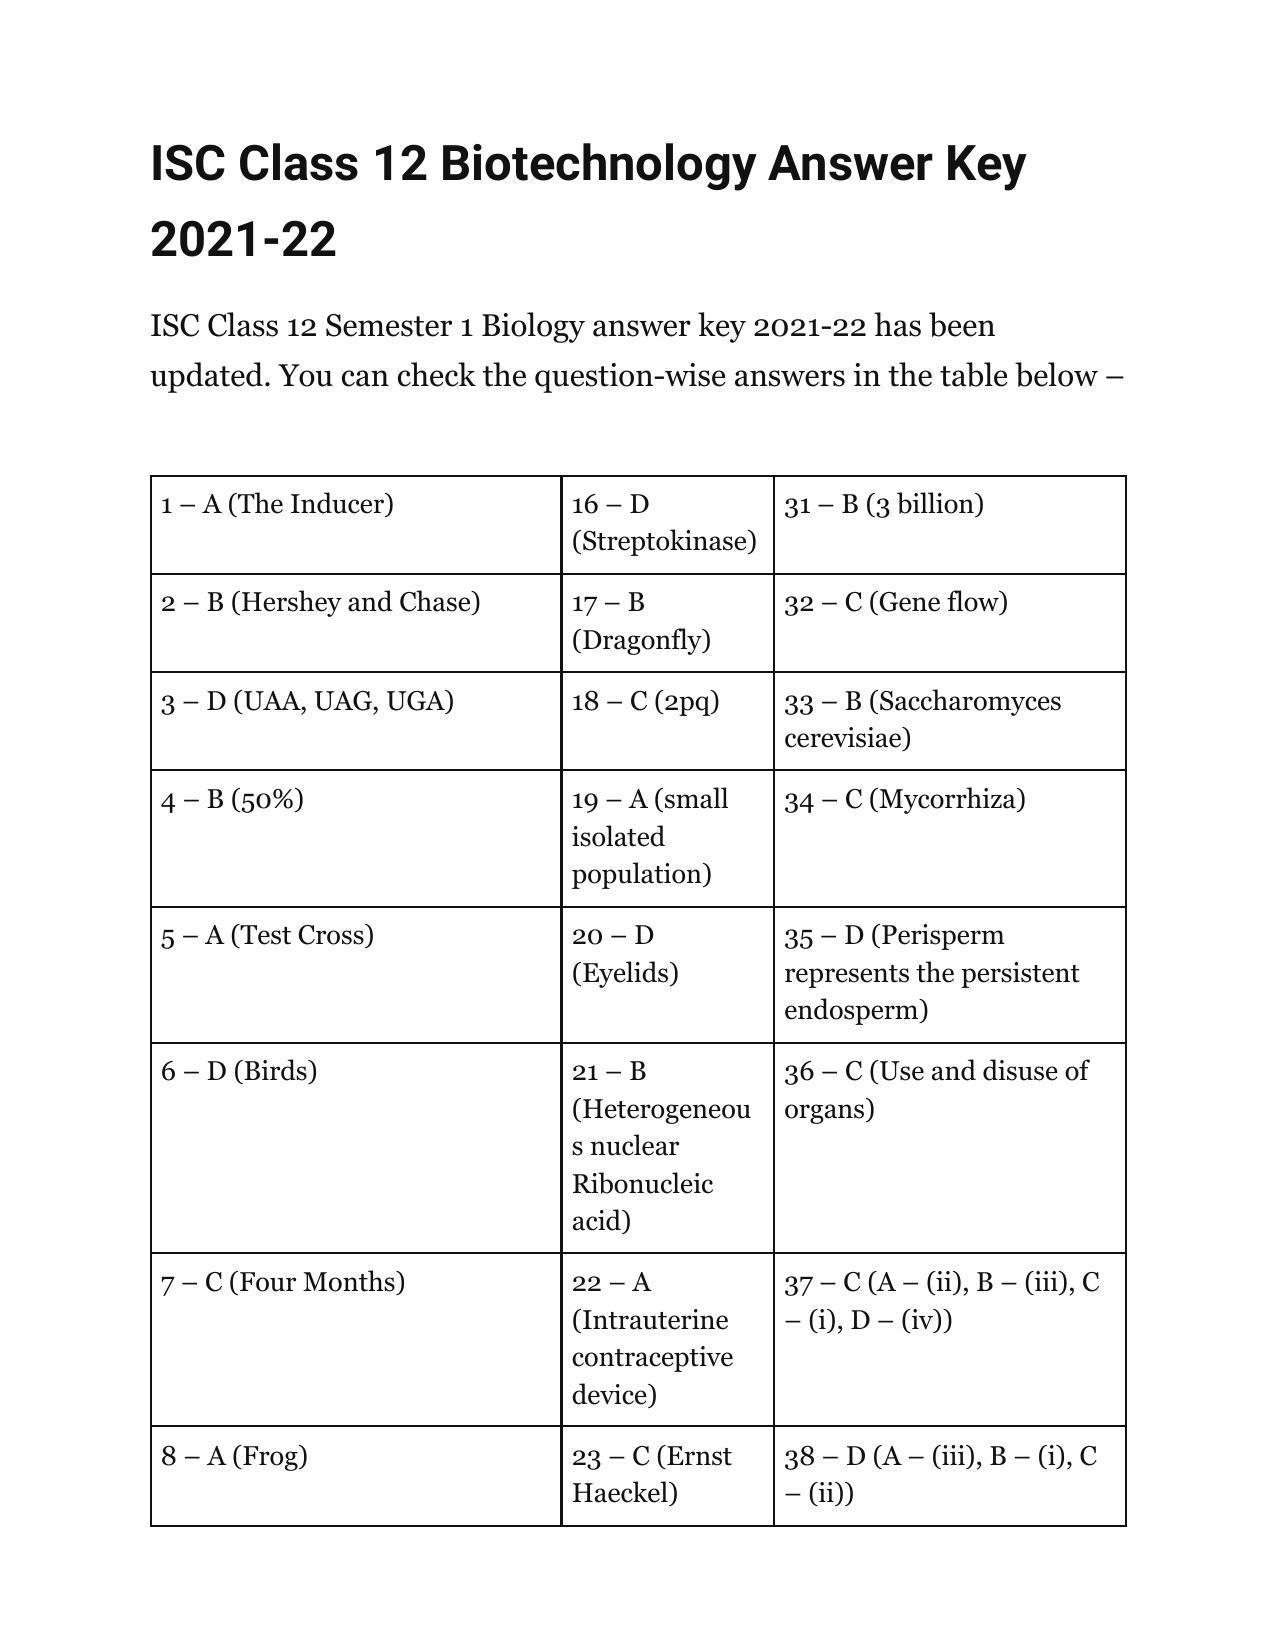 ISC Class 12 Biotechnology Answer Key 202122 IndCareer Docs